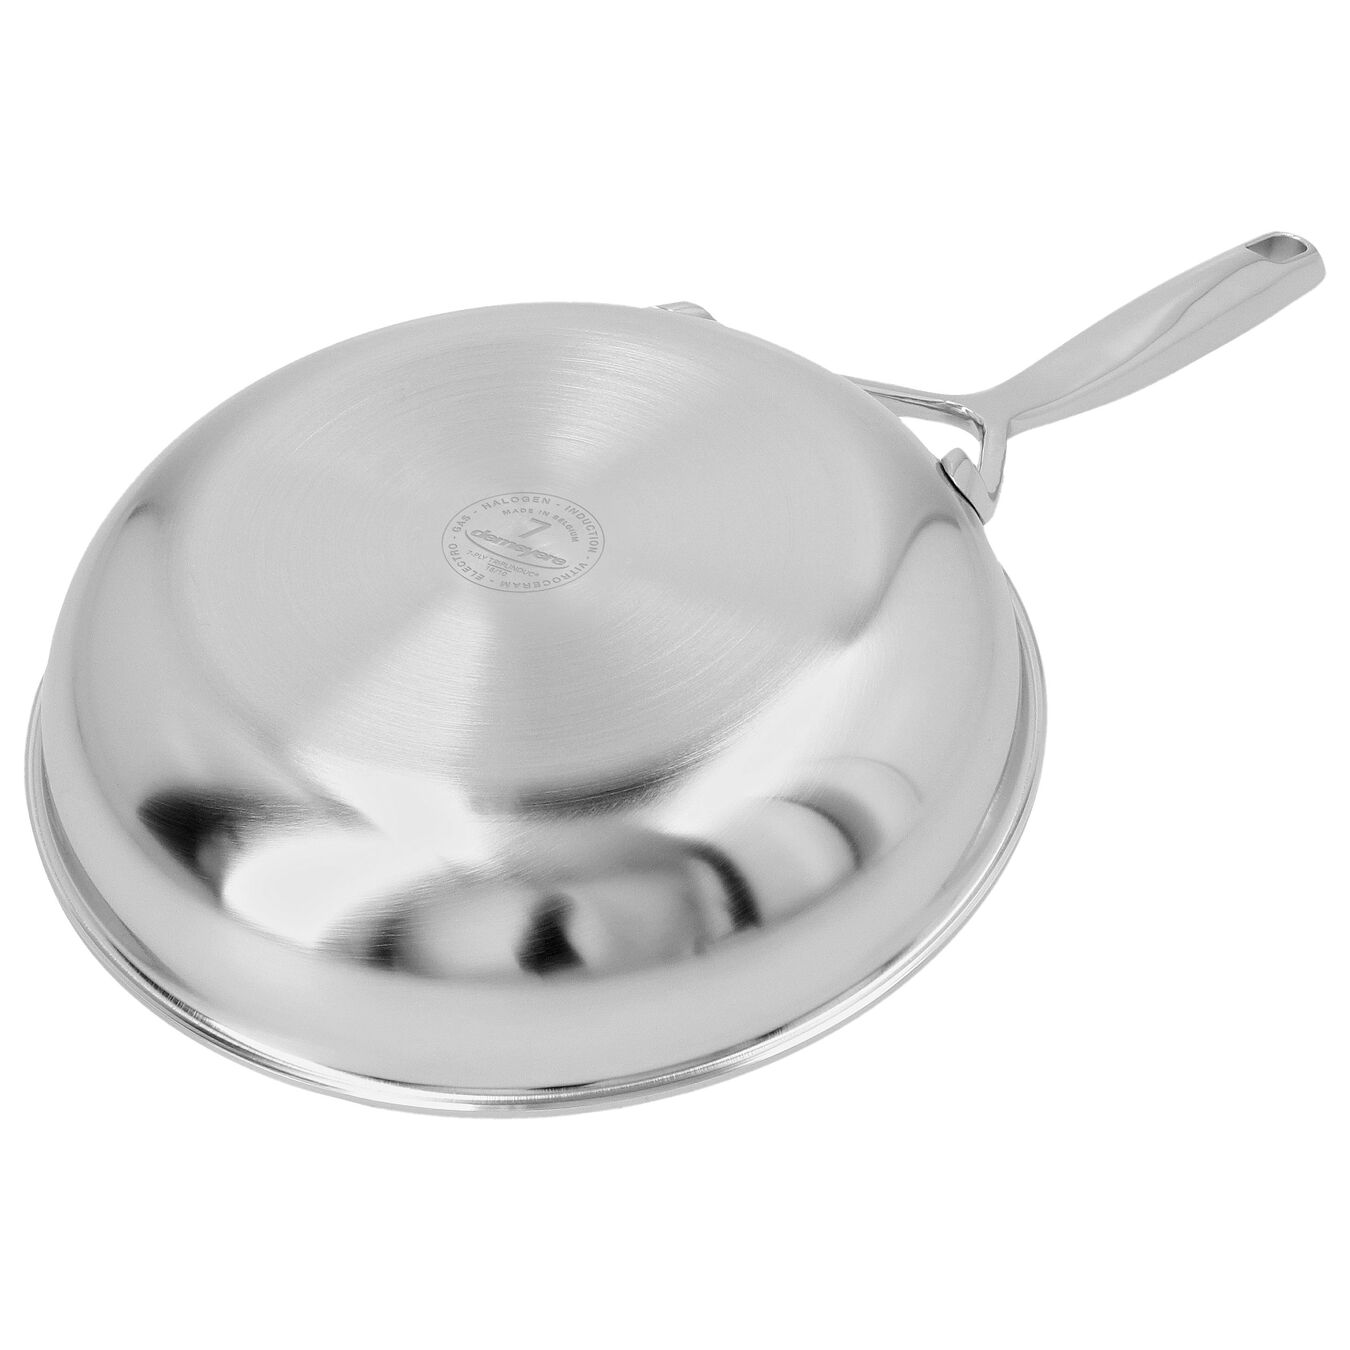 20 cm 18/10 Stainless Steel Frying pan silver,,large 5